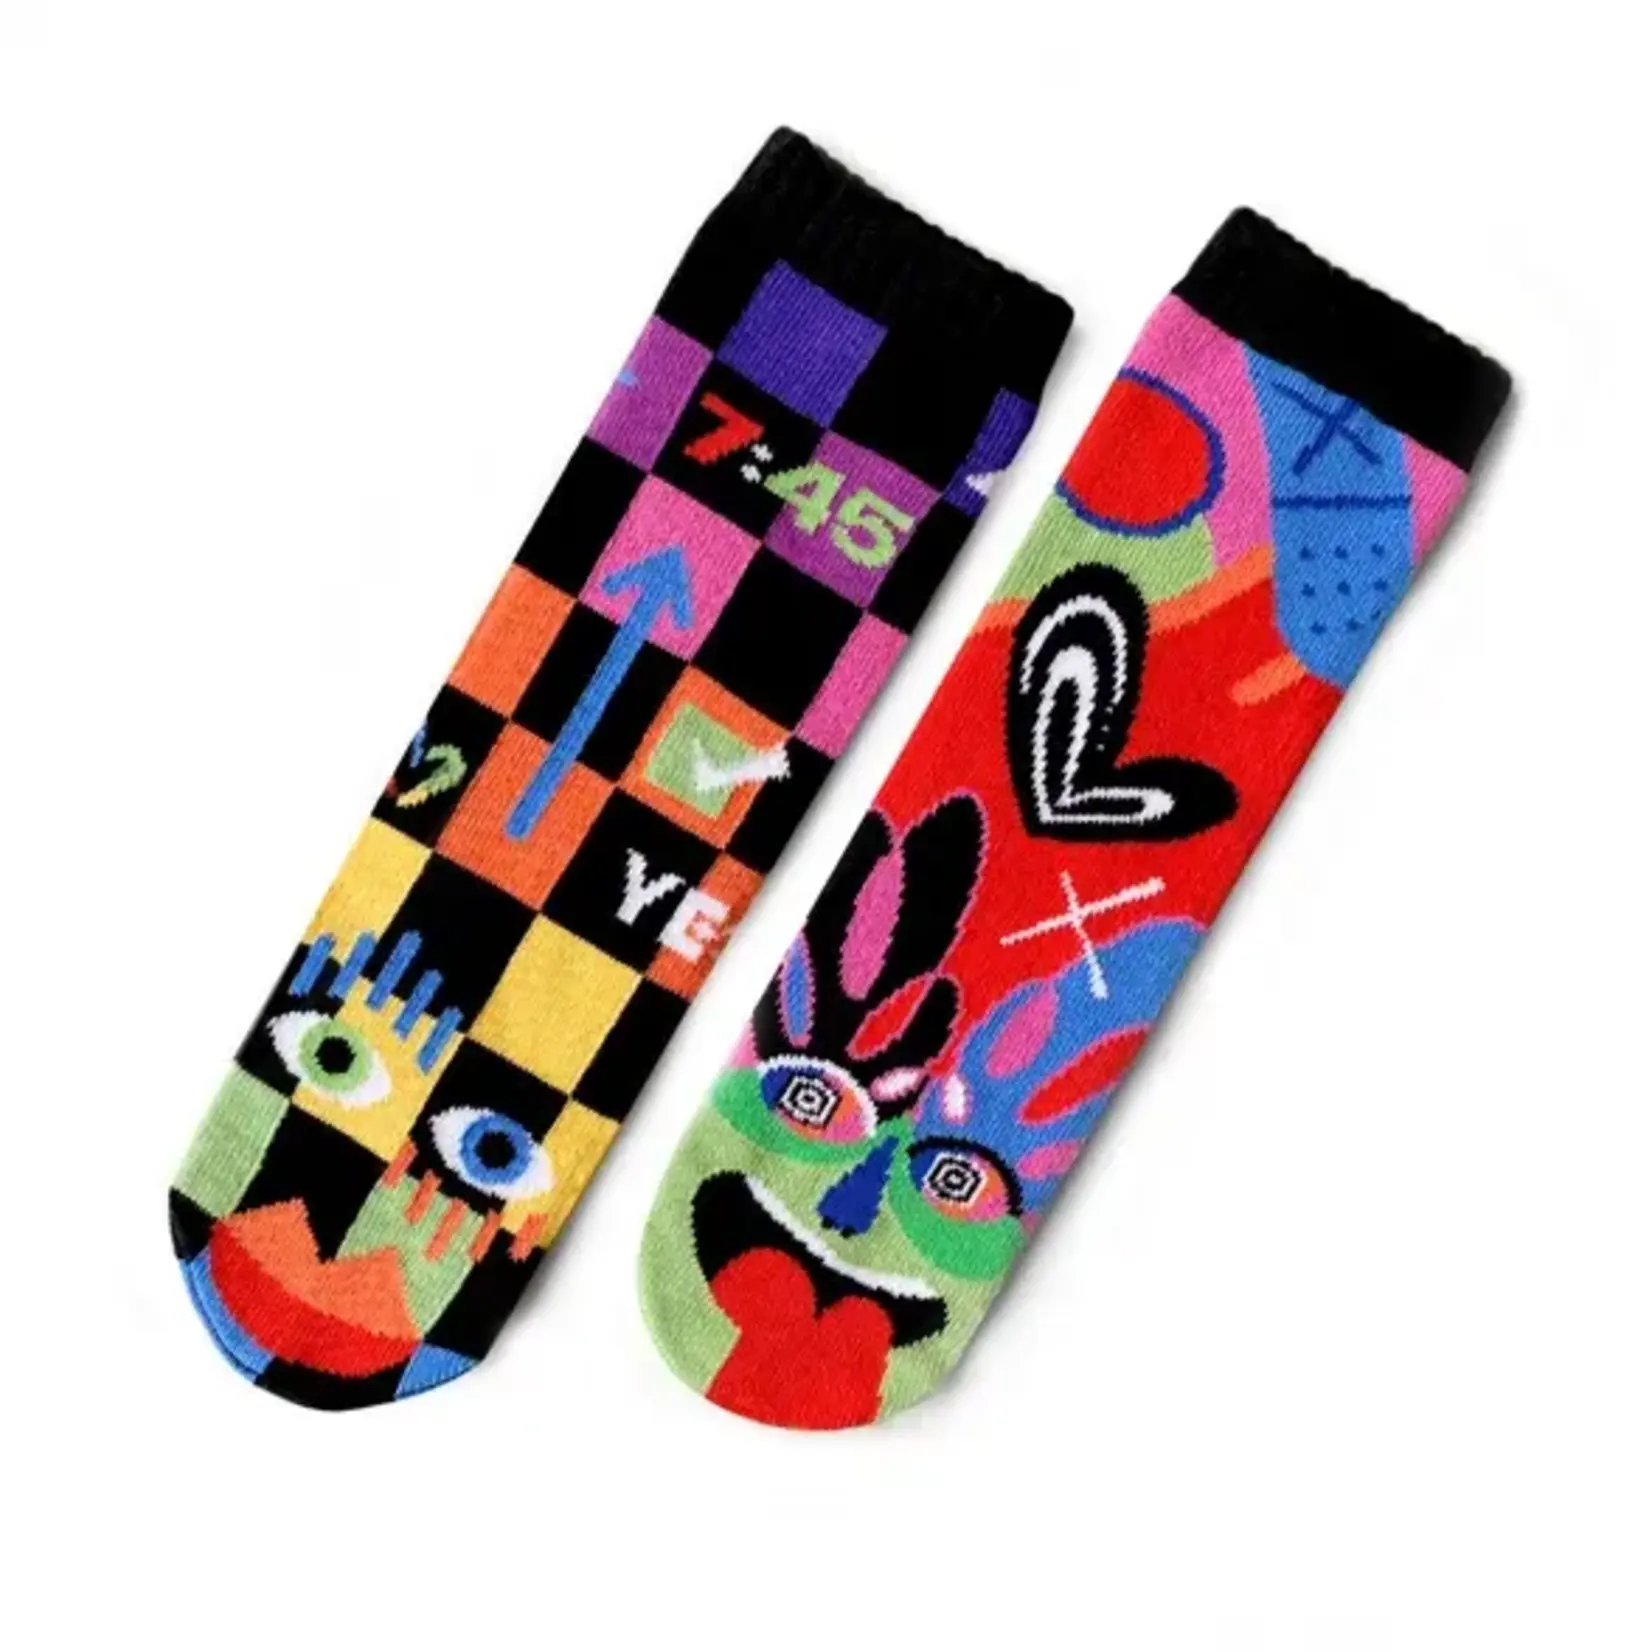 Pals Socks - Planner & Spontaneous, Ages 4-8